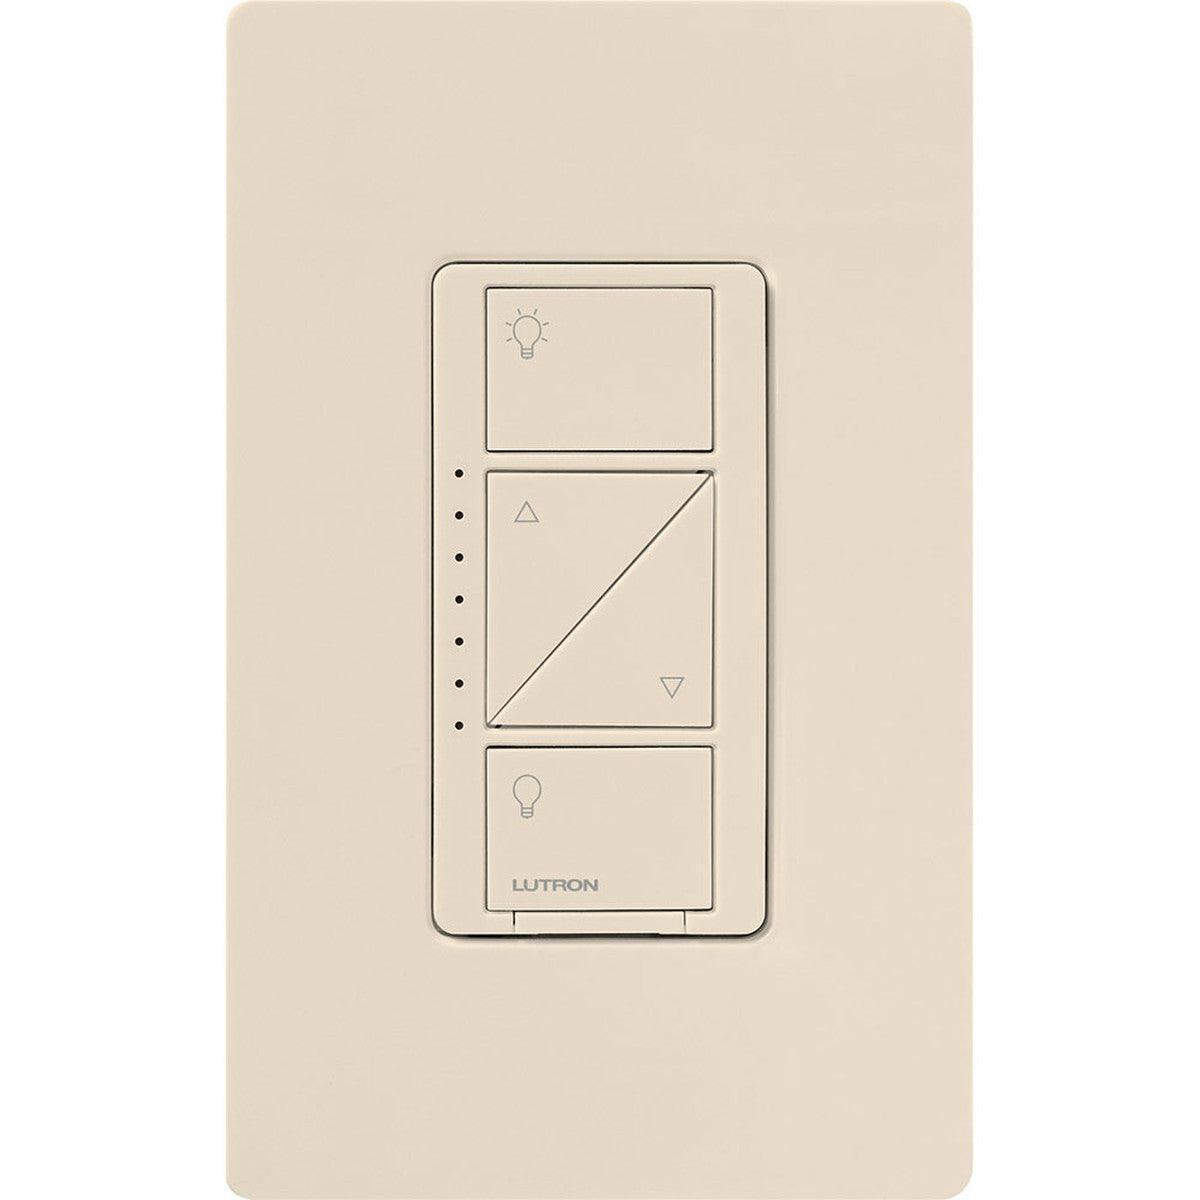 Lutron Caseta Dimmer Switches and Light Switches